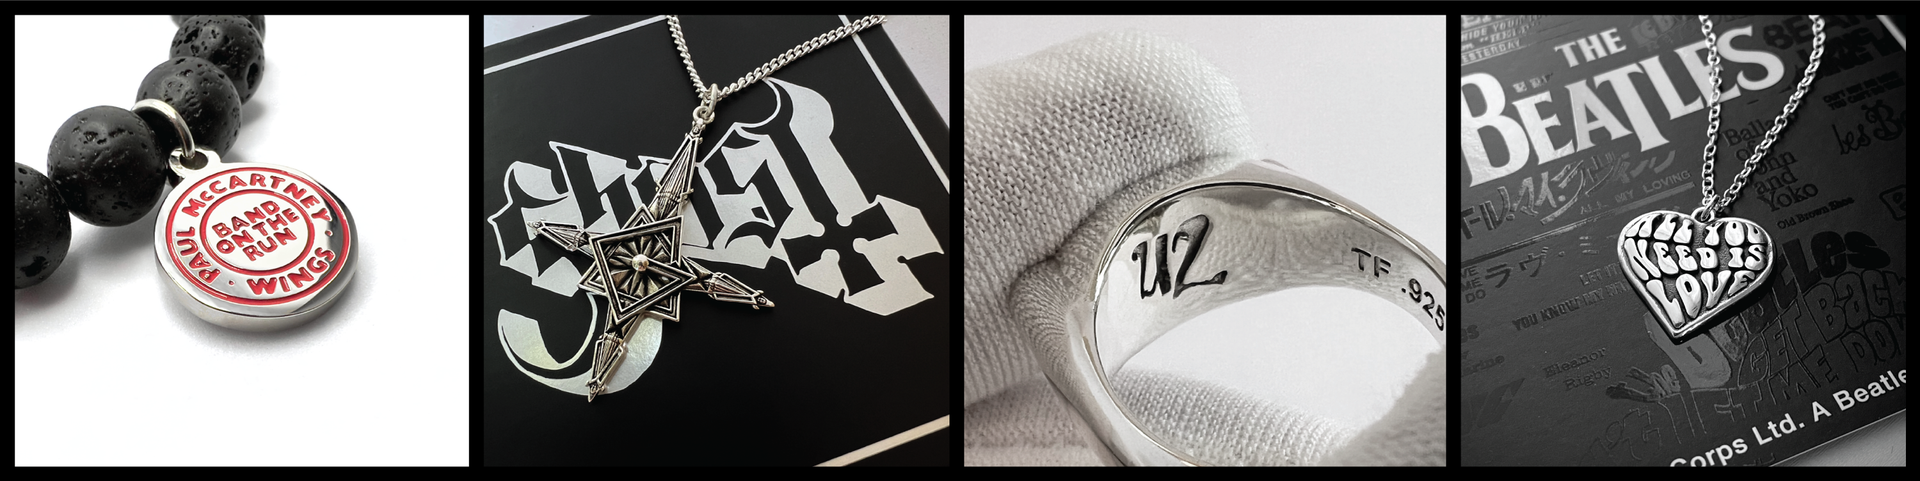 Beyond The Band Tee:  How Custom Jewelry Can Amplify a Merch Line